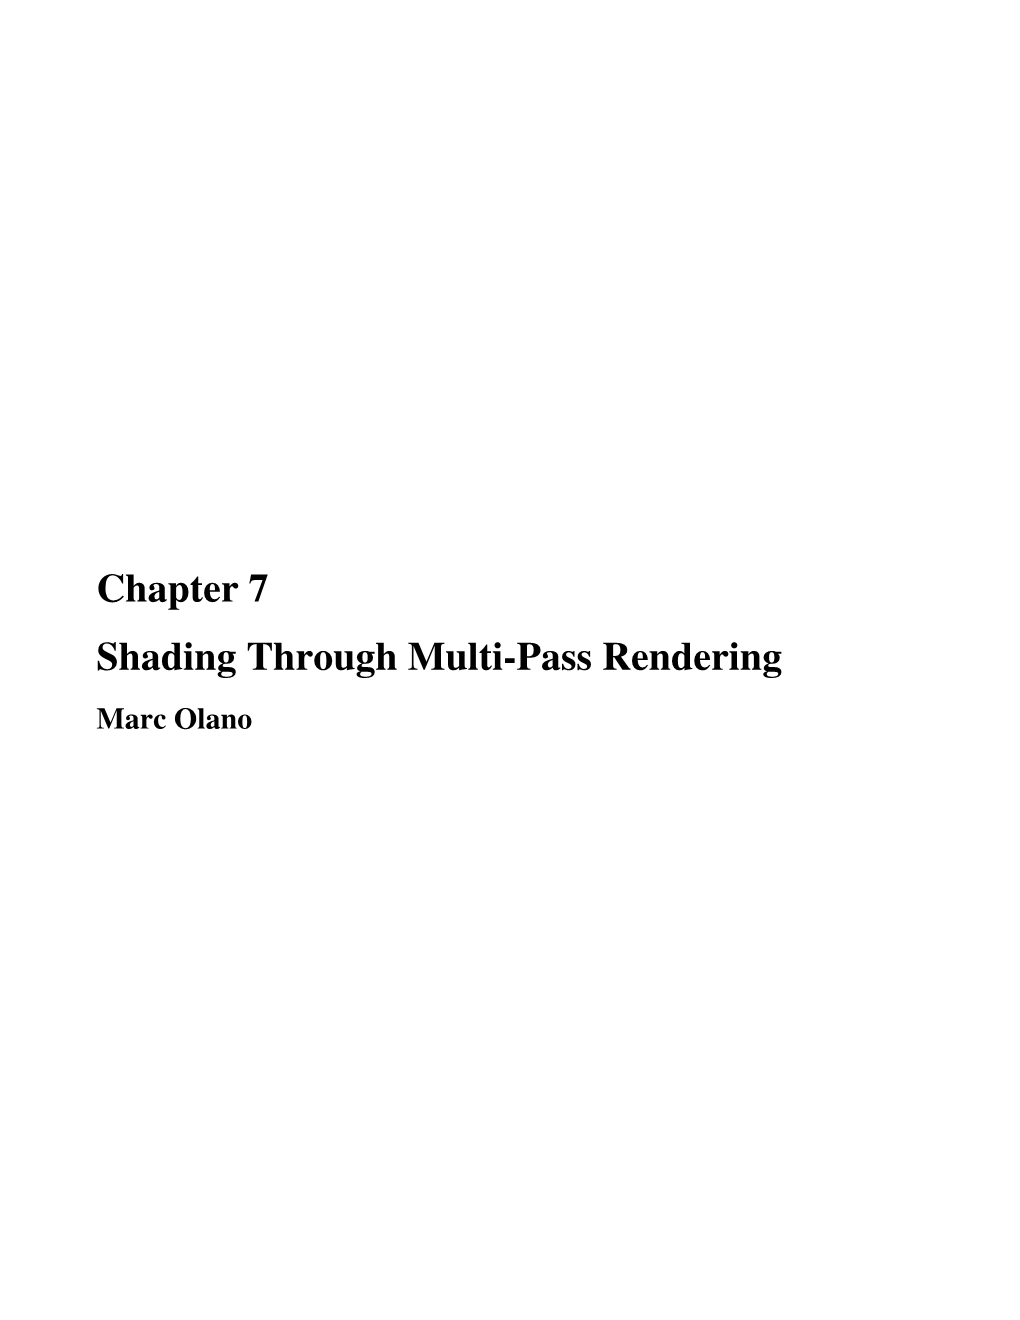 Chapter 7: Shading Through Multi-Pass Rendering